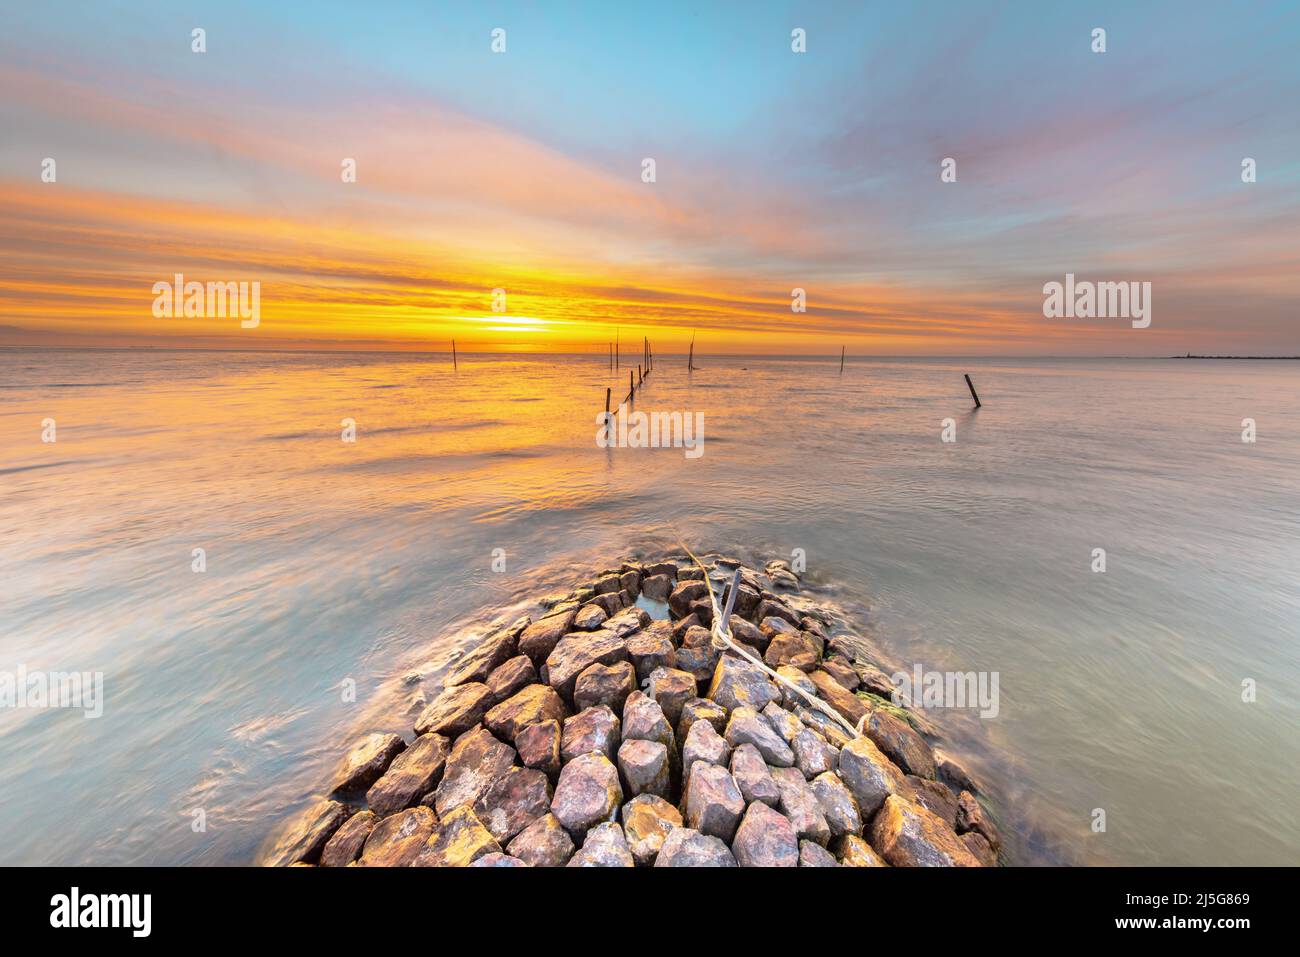 Typical basalt breakwater pier construction at  IJsselmeer near the town of Hindeloopen in the Friesland Province at sunset, Netherlands. Stock Photo